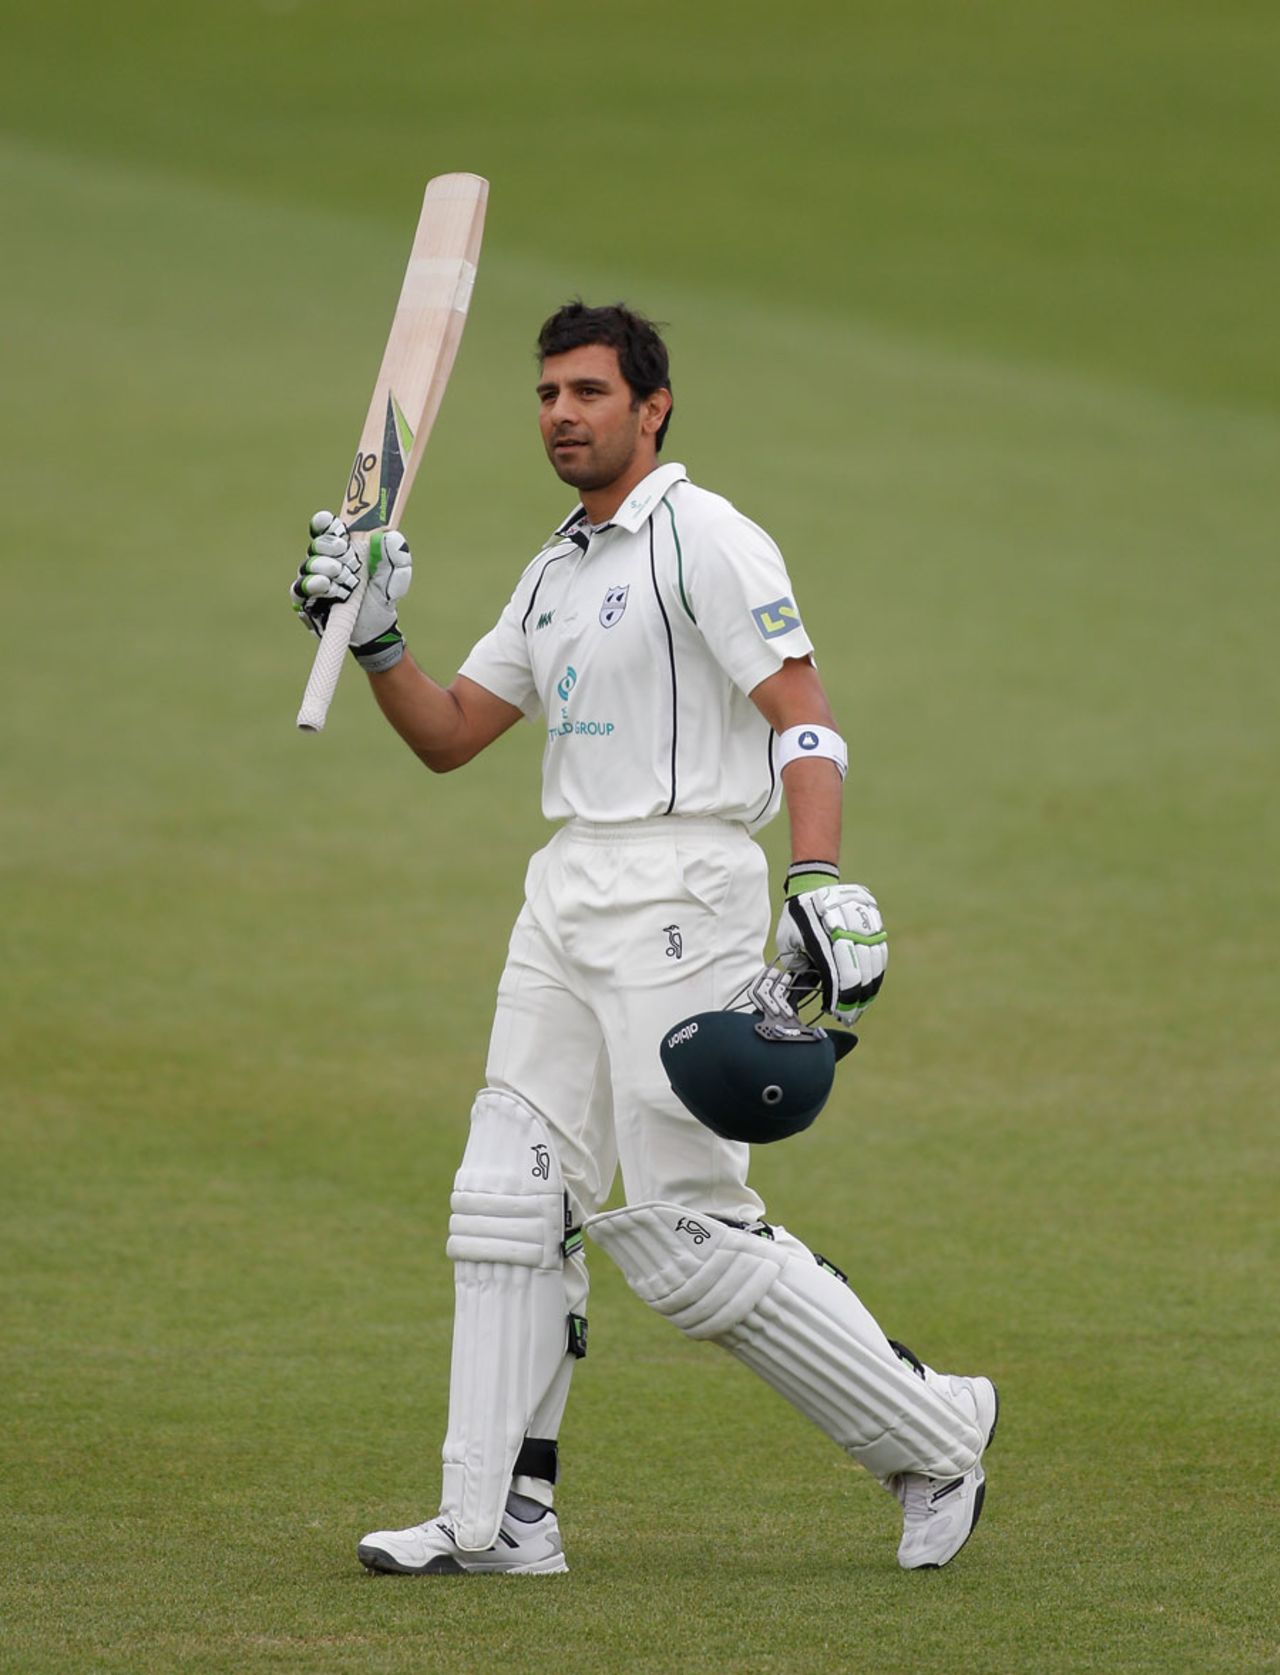 Vikram Solanki reached his century before Worcestershire collapsed, Worcestershire v Somerset, County Championship, Division One, New Road, 2nd day, May 31, 2012